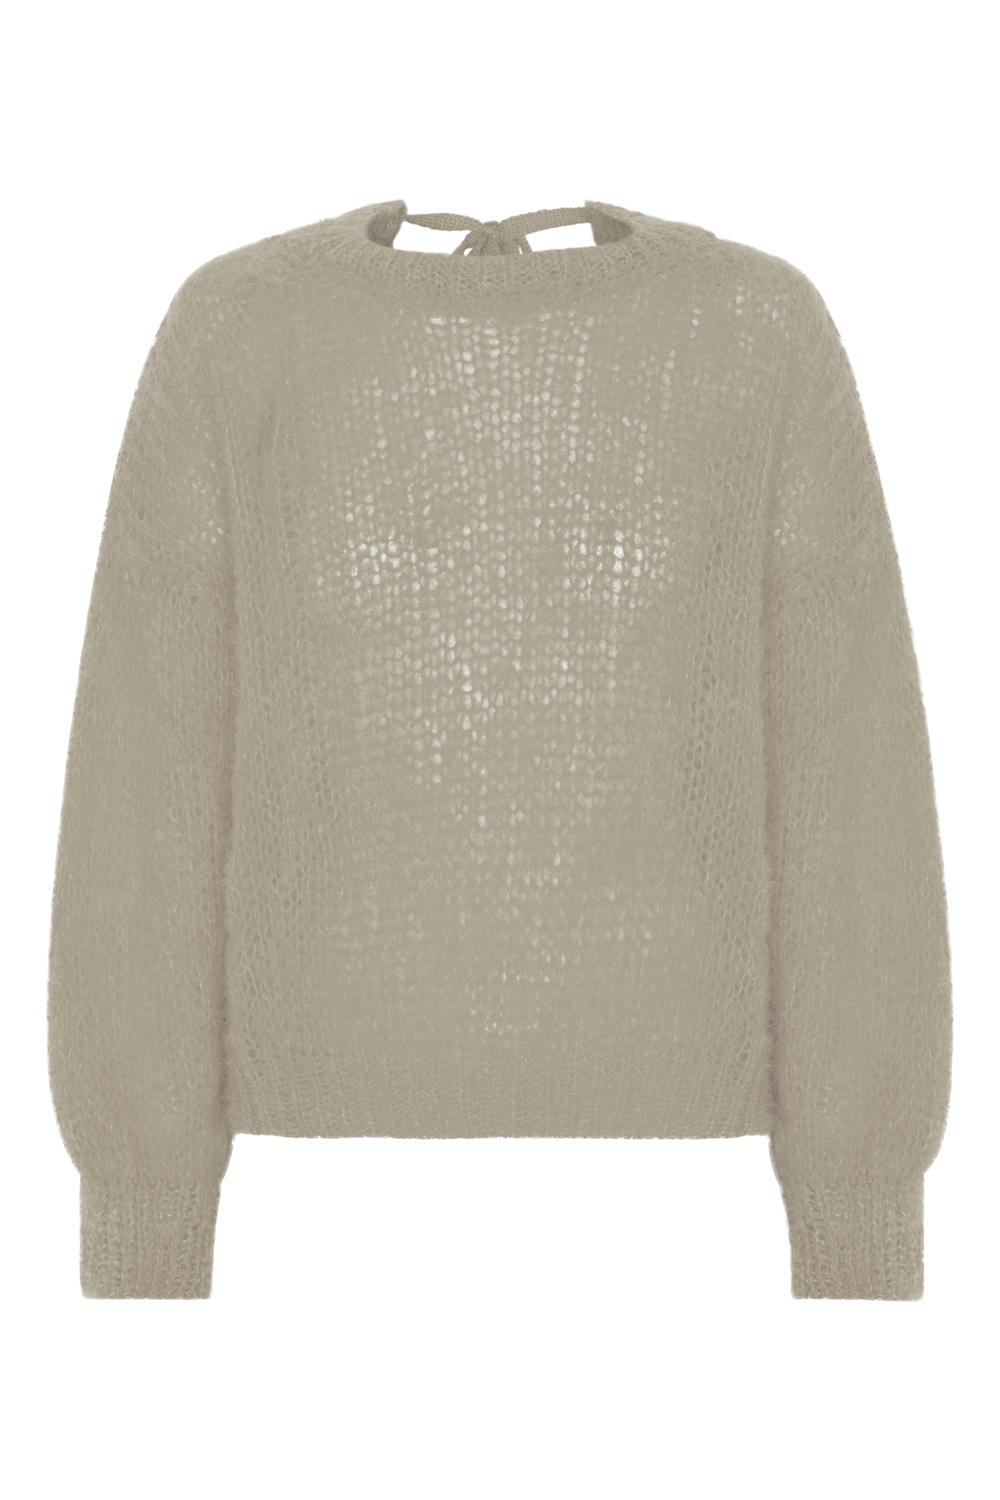 Toga Back Tie Mohair Pullover Beige